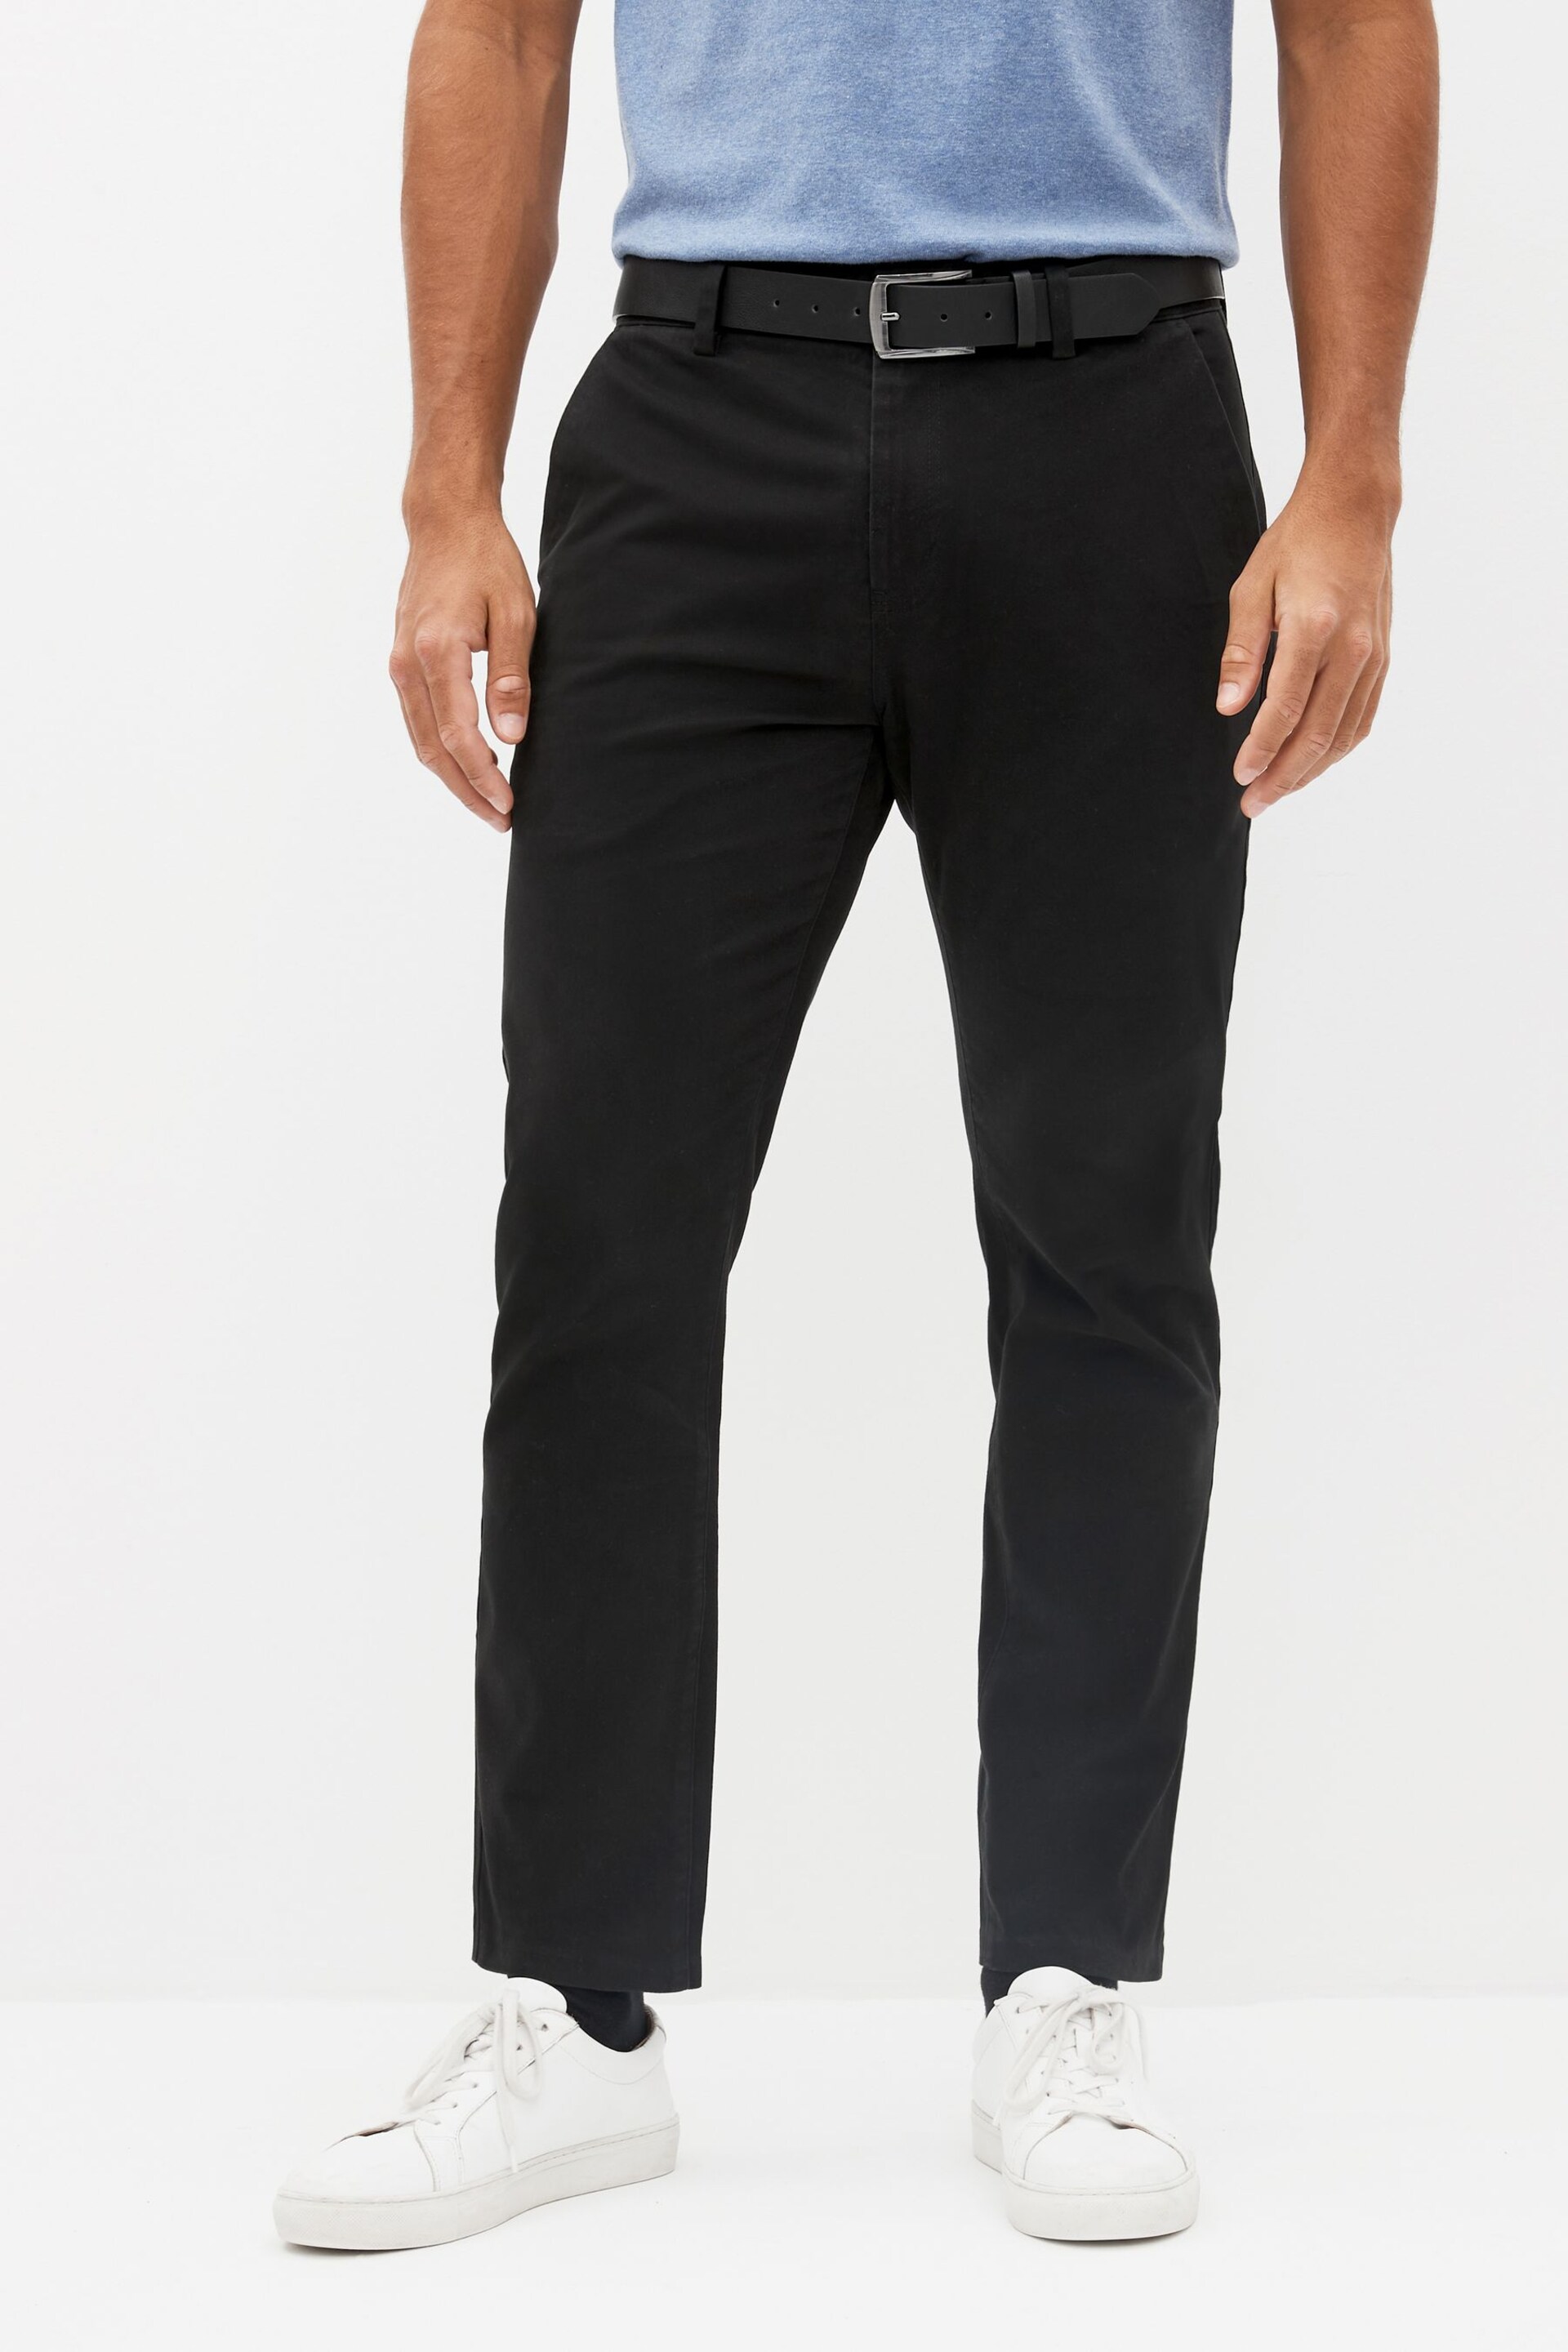 Black Slim Fit Belted Soft Touch Chino Trousers - Image 1 of 9